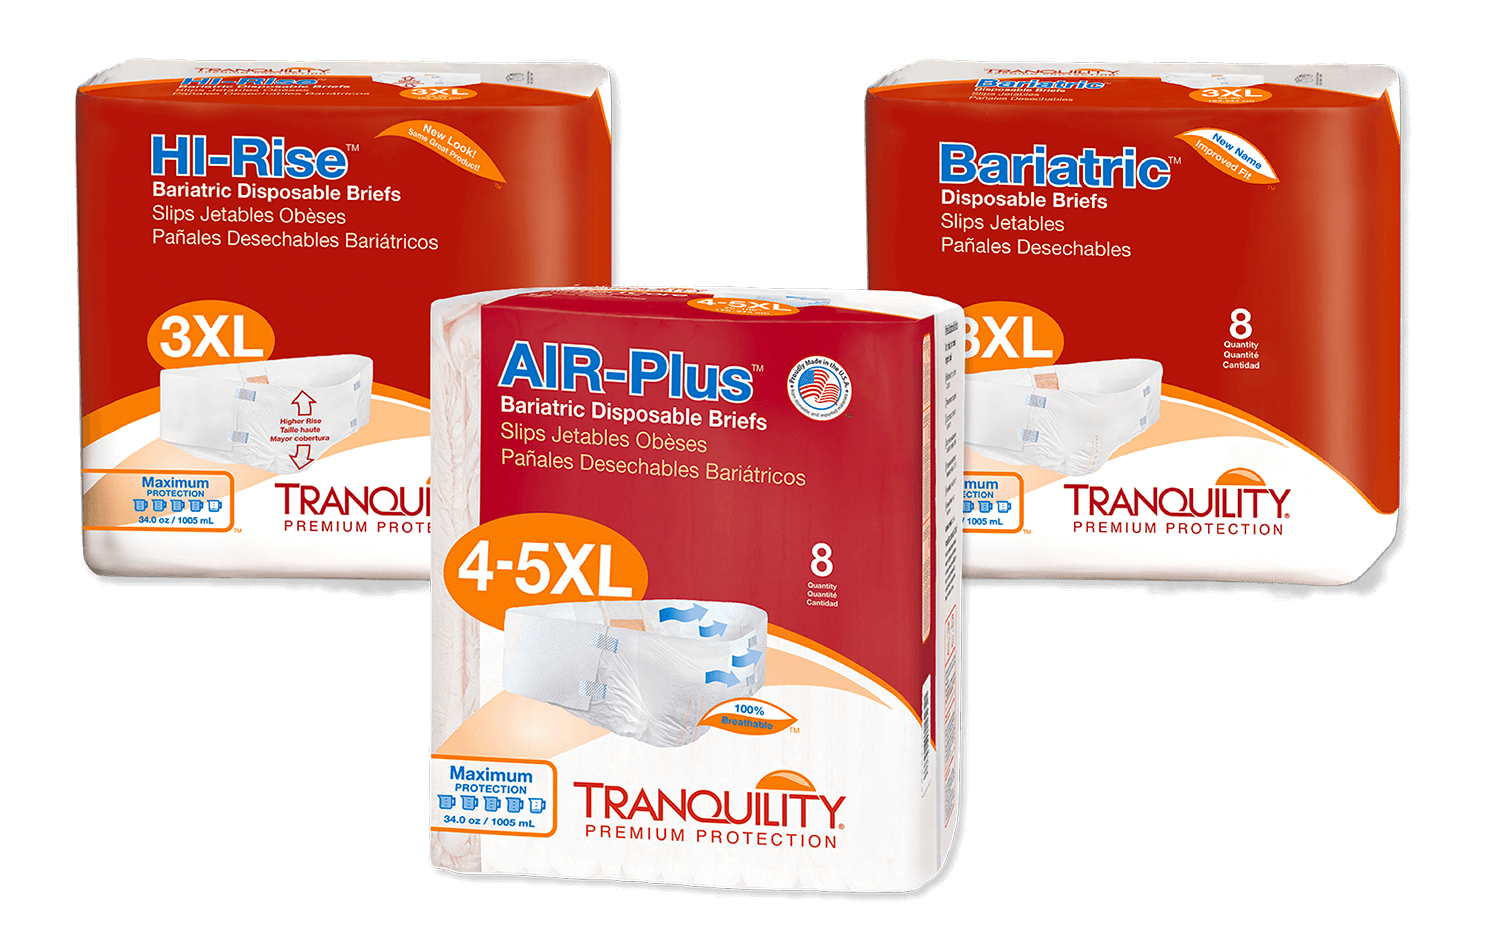 Tranquility Bariatric Disposable Briefs (3XL)